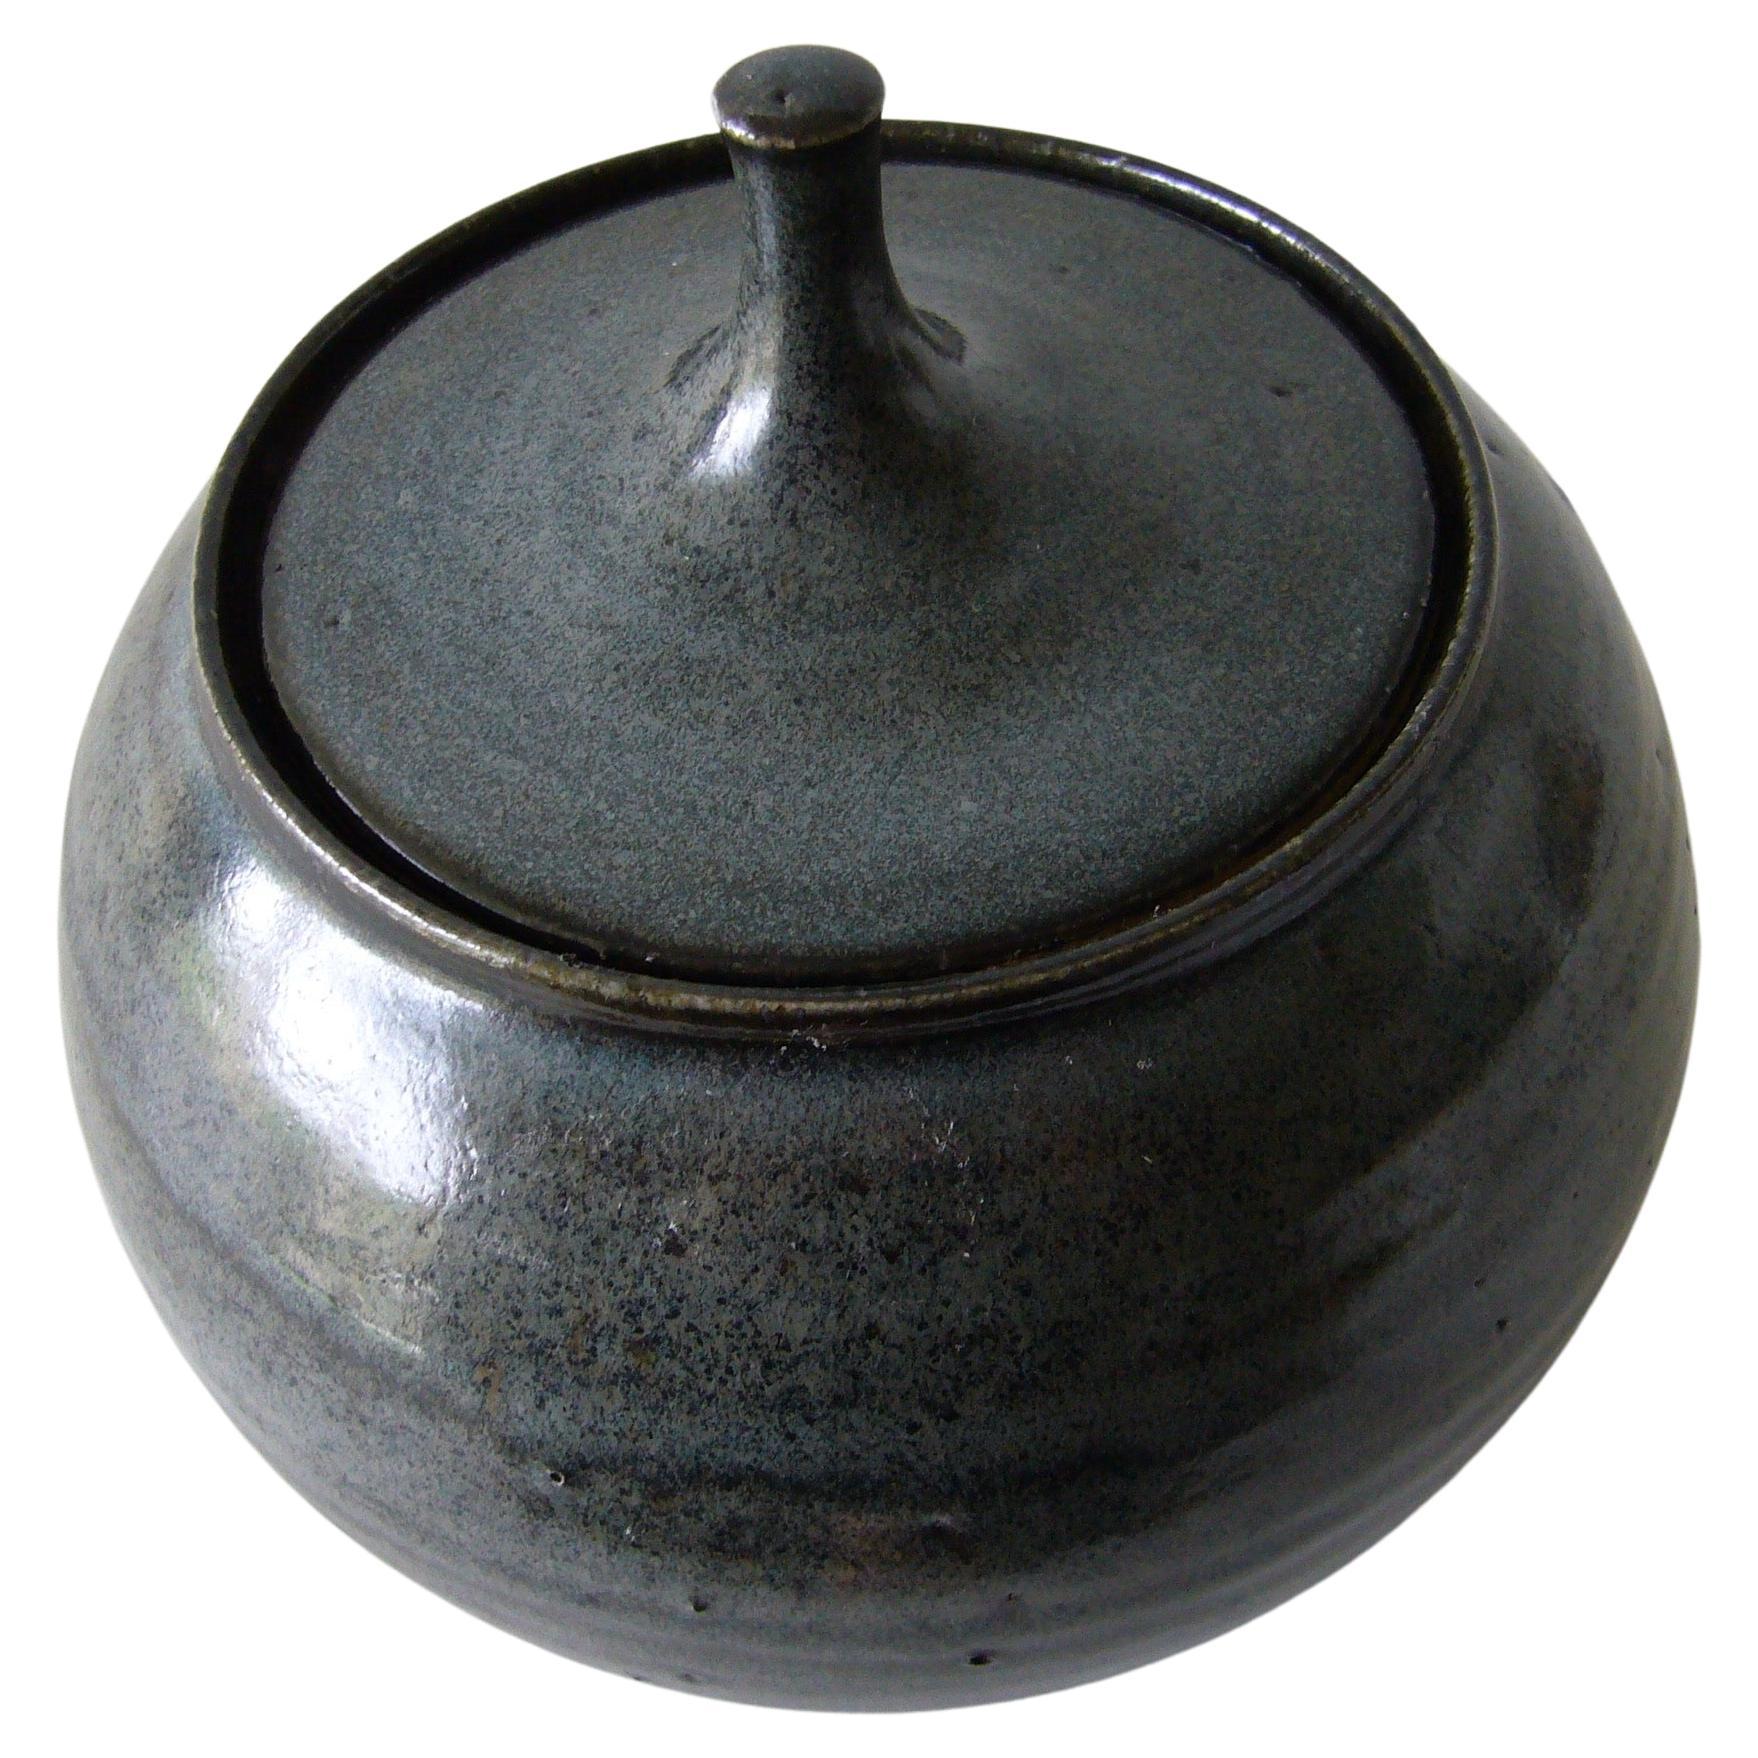 California stoneware studio pottery lidded vessel made by Tom McMillin.  Piece stands 7